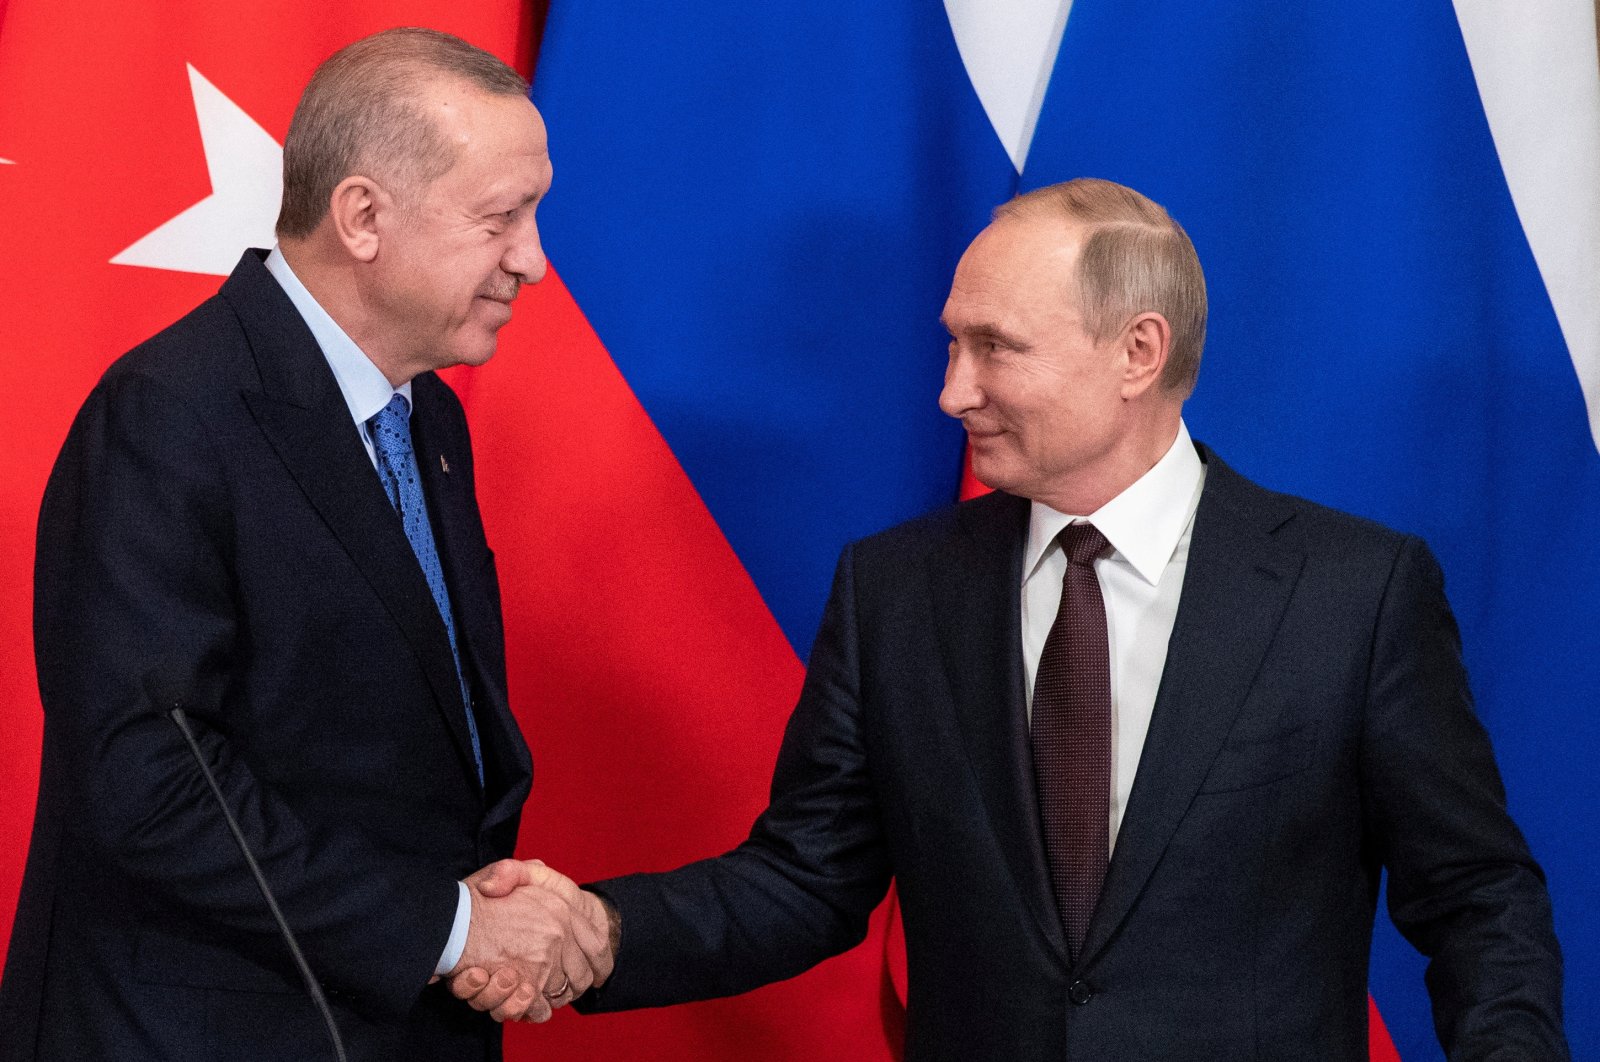 President Recep Tayyip Erdoğan (L) and his Russian counterpart Vladimir Putin shake hands during a news conference following their talks in Moscow, Russia, March 5, 2020. (Reuters Photo)